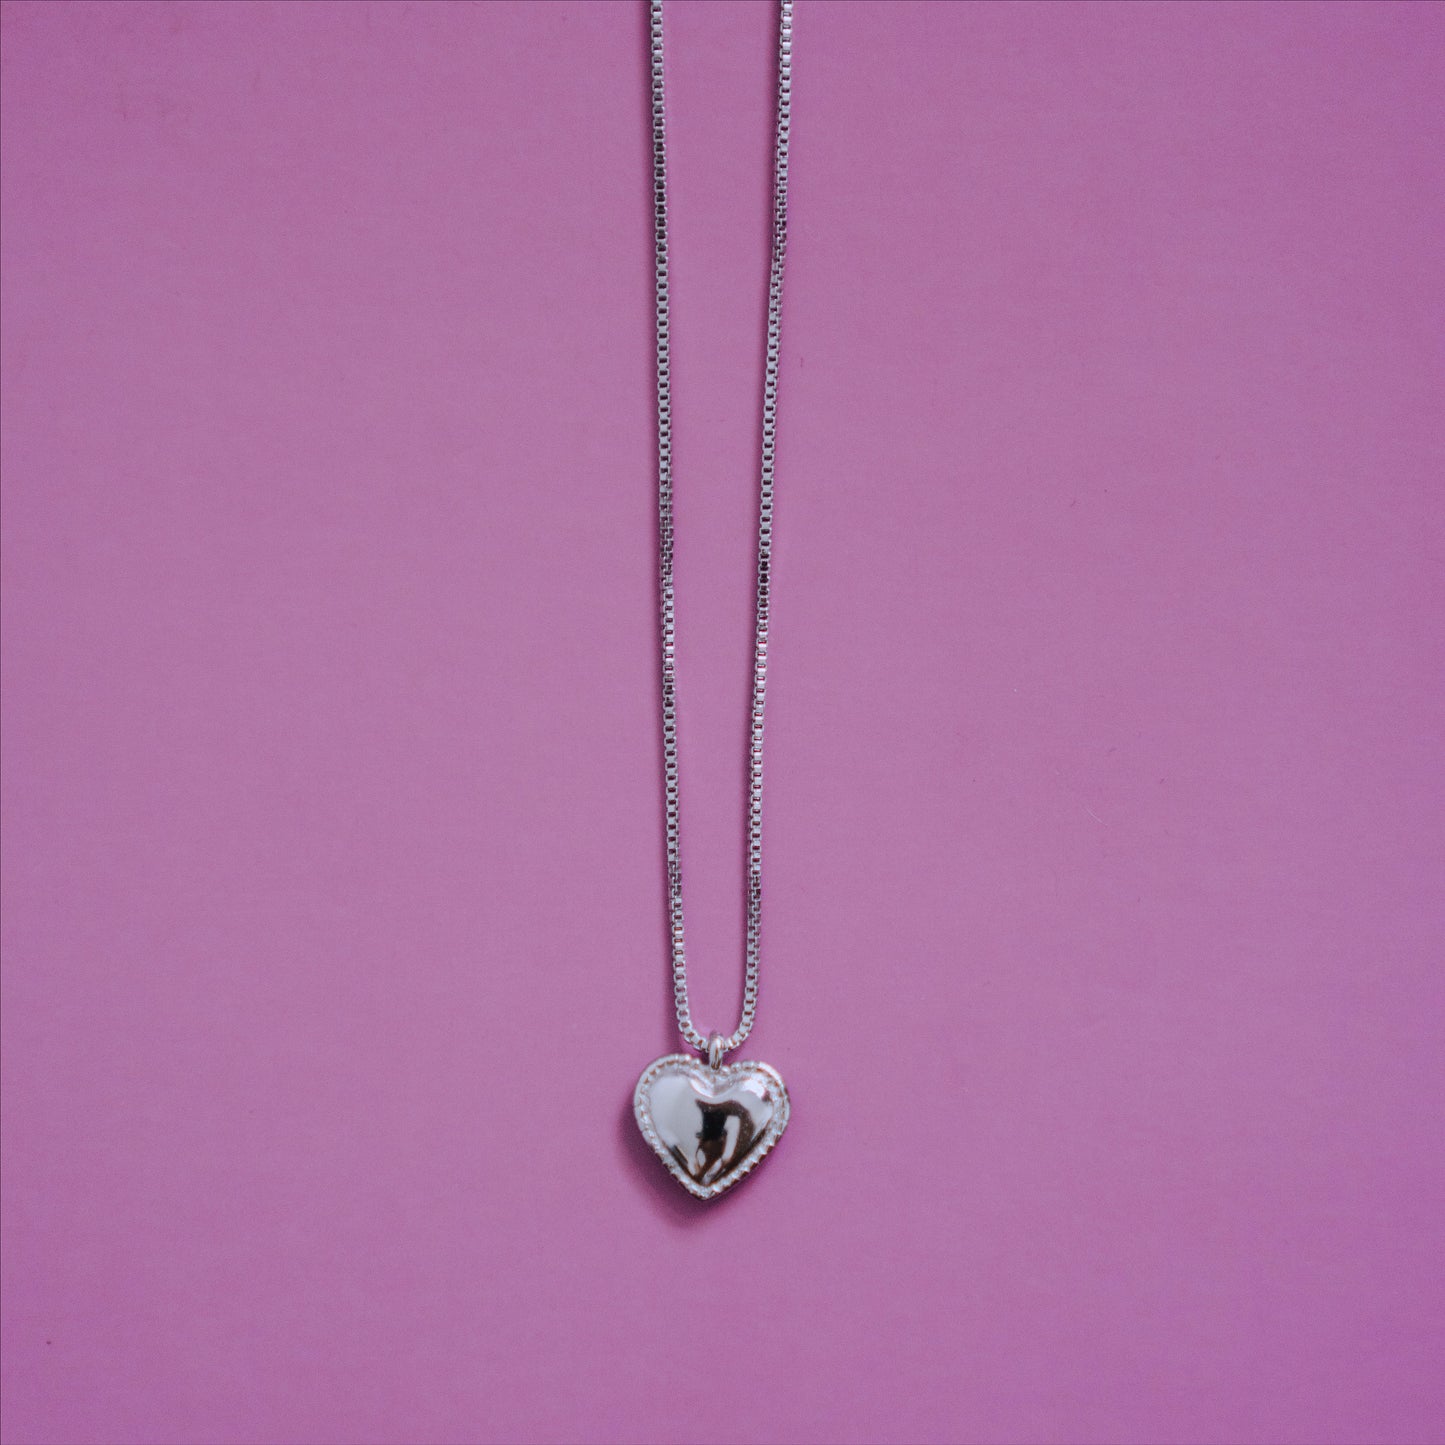 THE LOVER NECKLACE